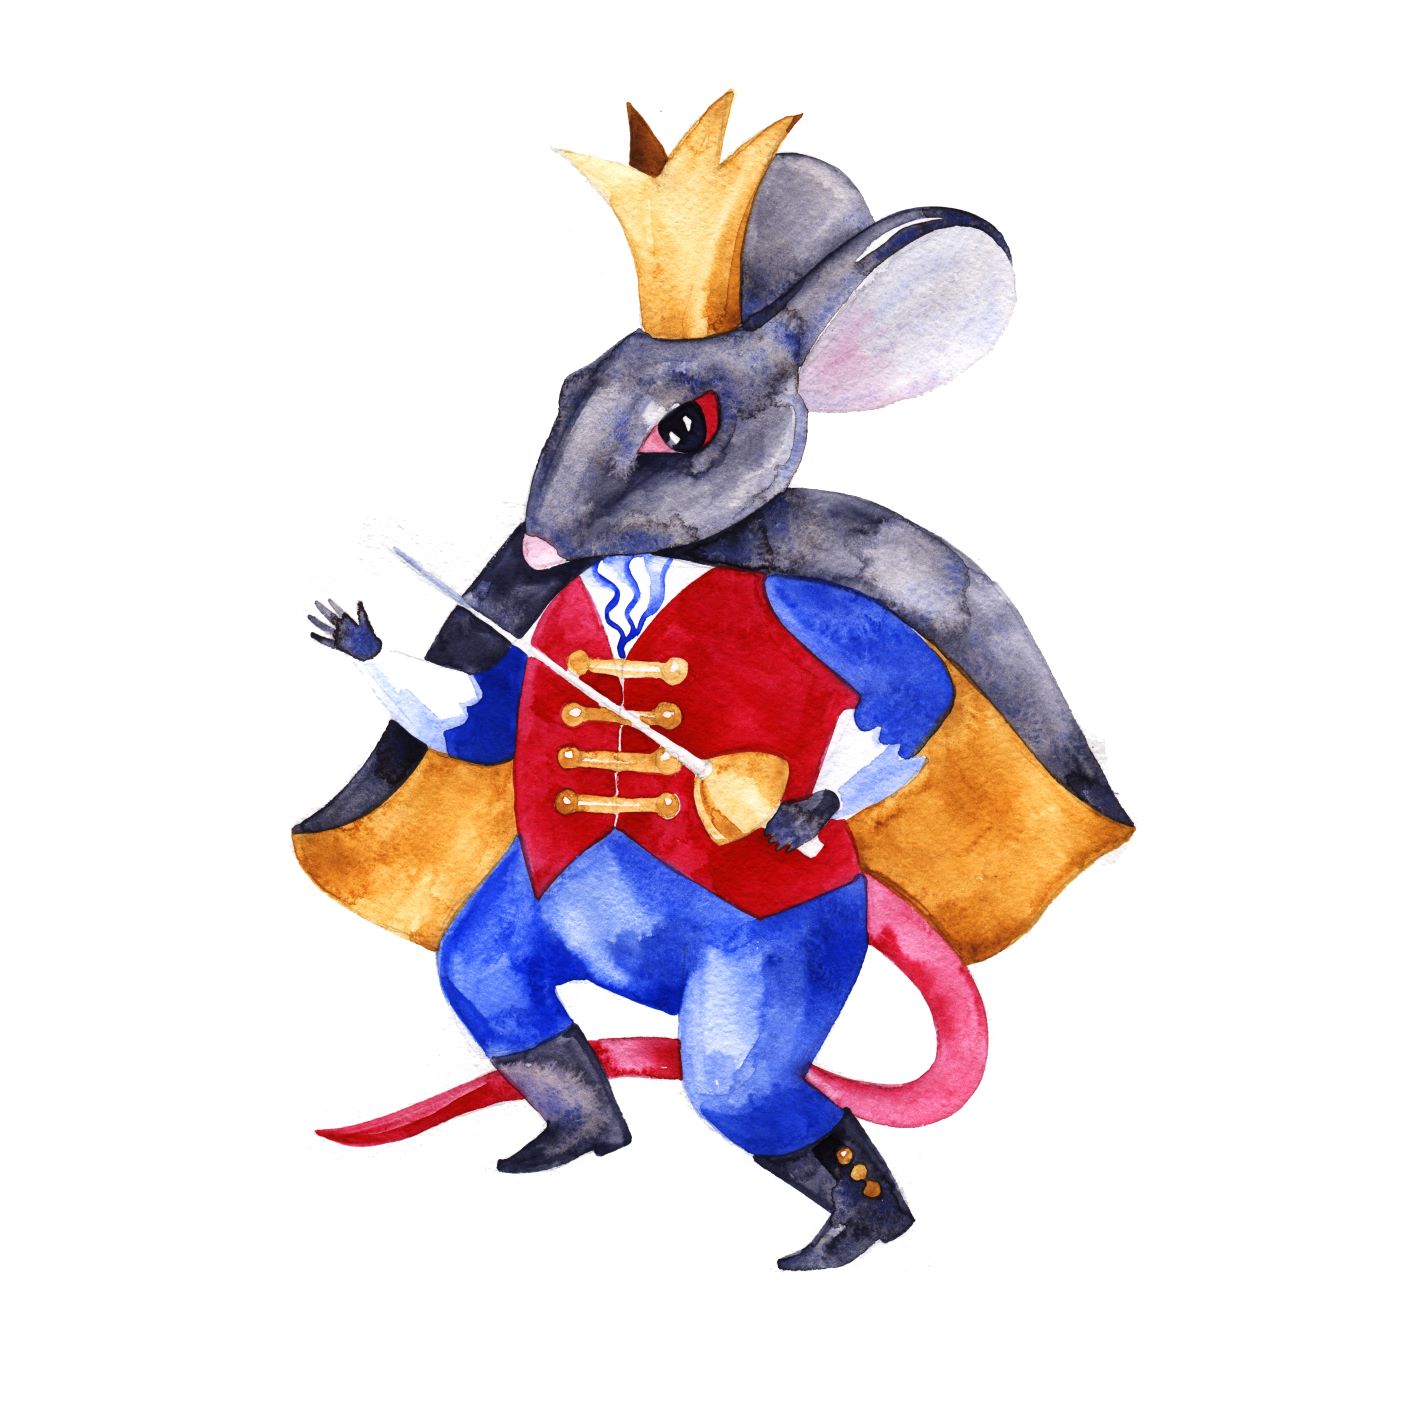 The hero in Submerged Hopes was once the Rat King from The Nutcracker.